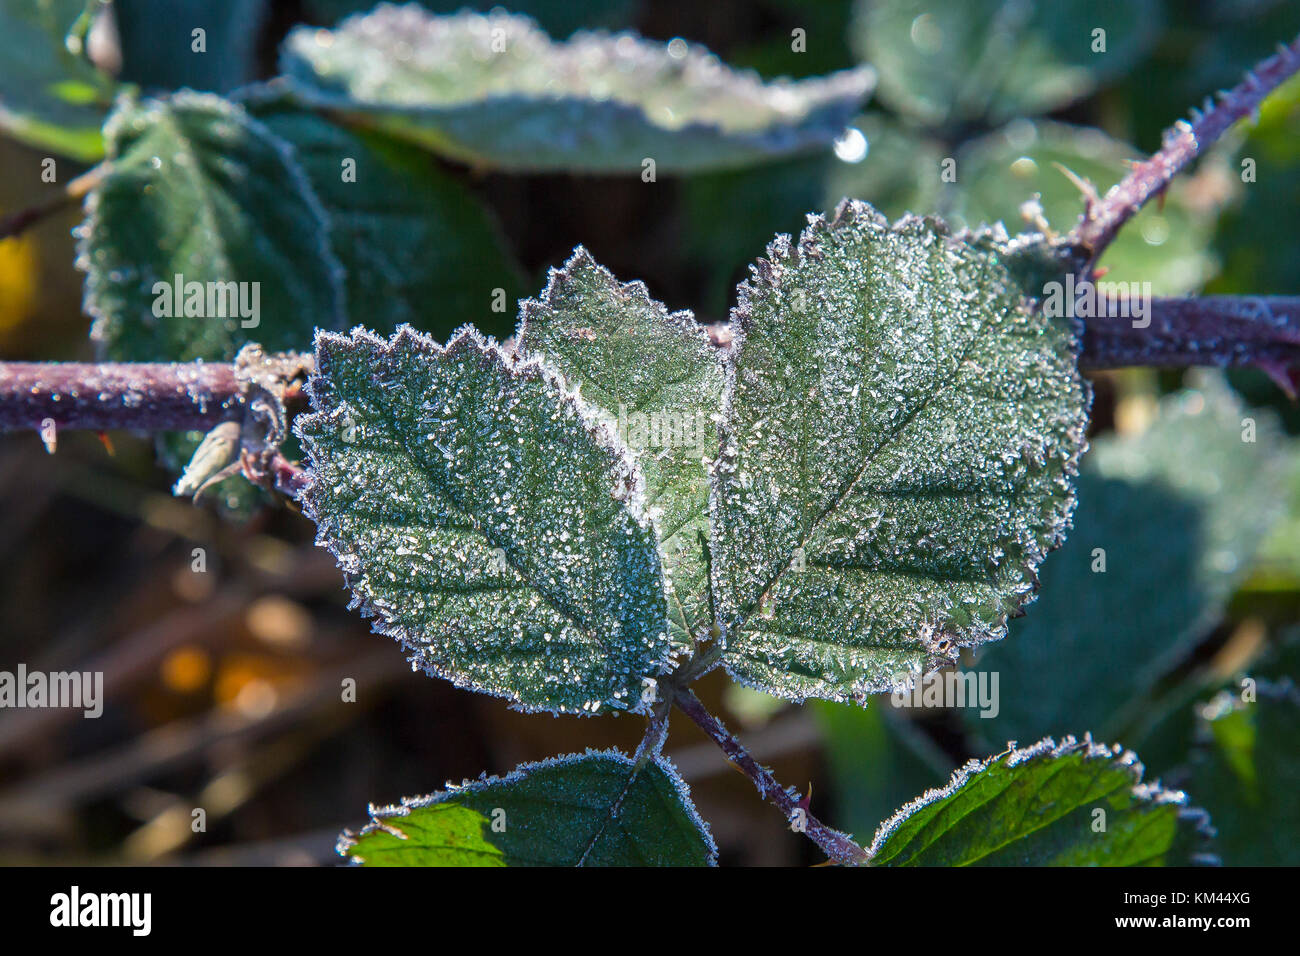 Iced leaf with ice crystal Stock Photo